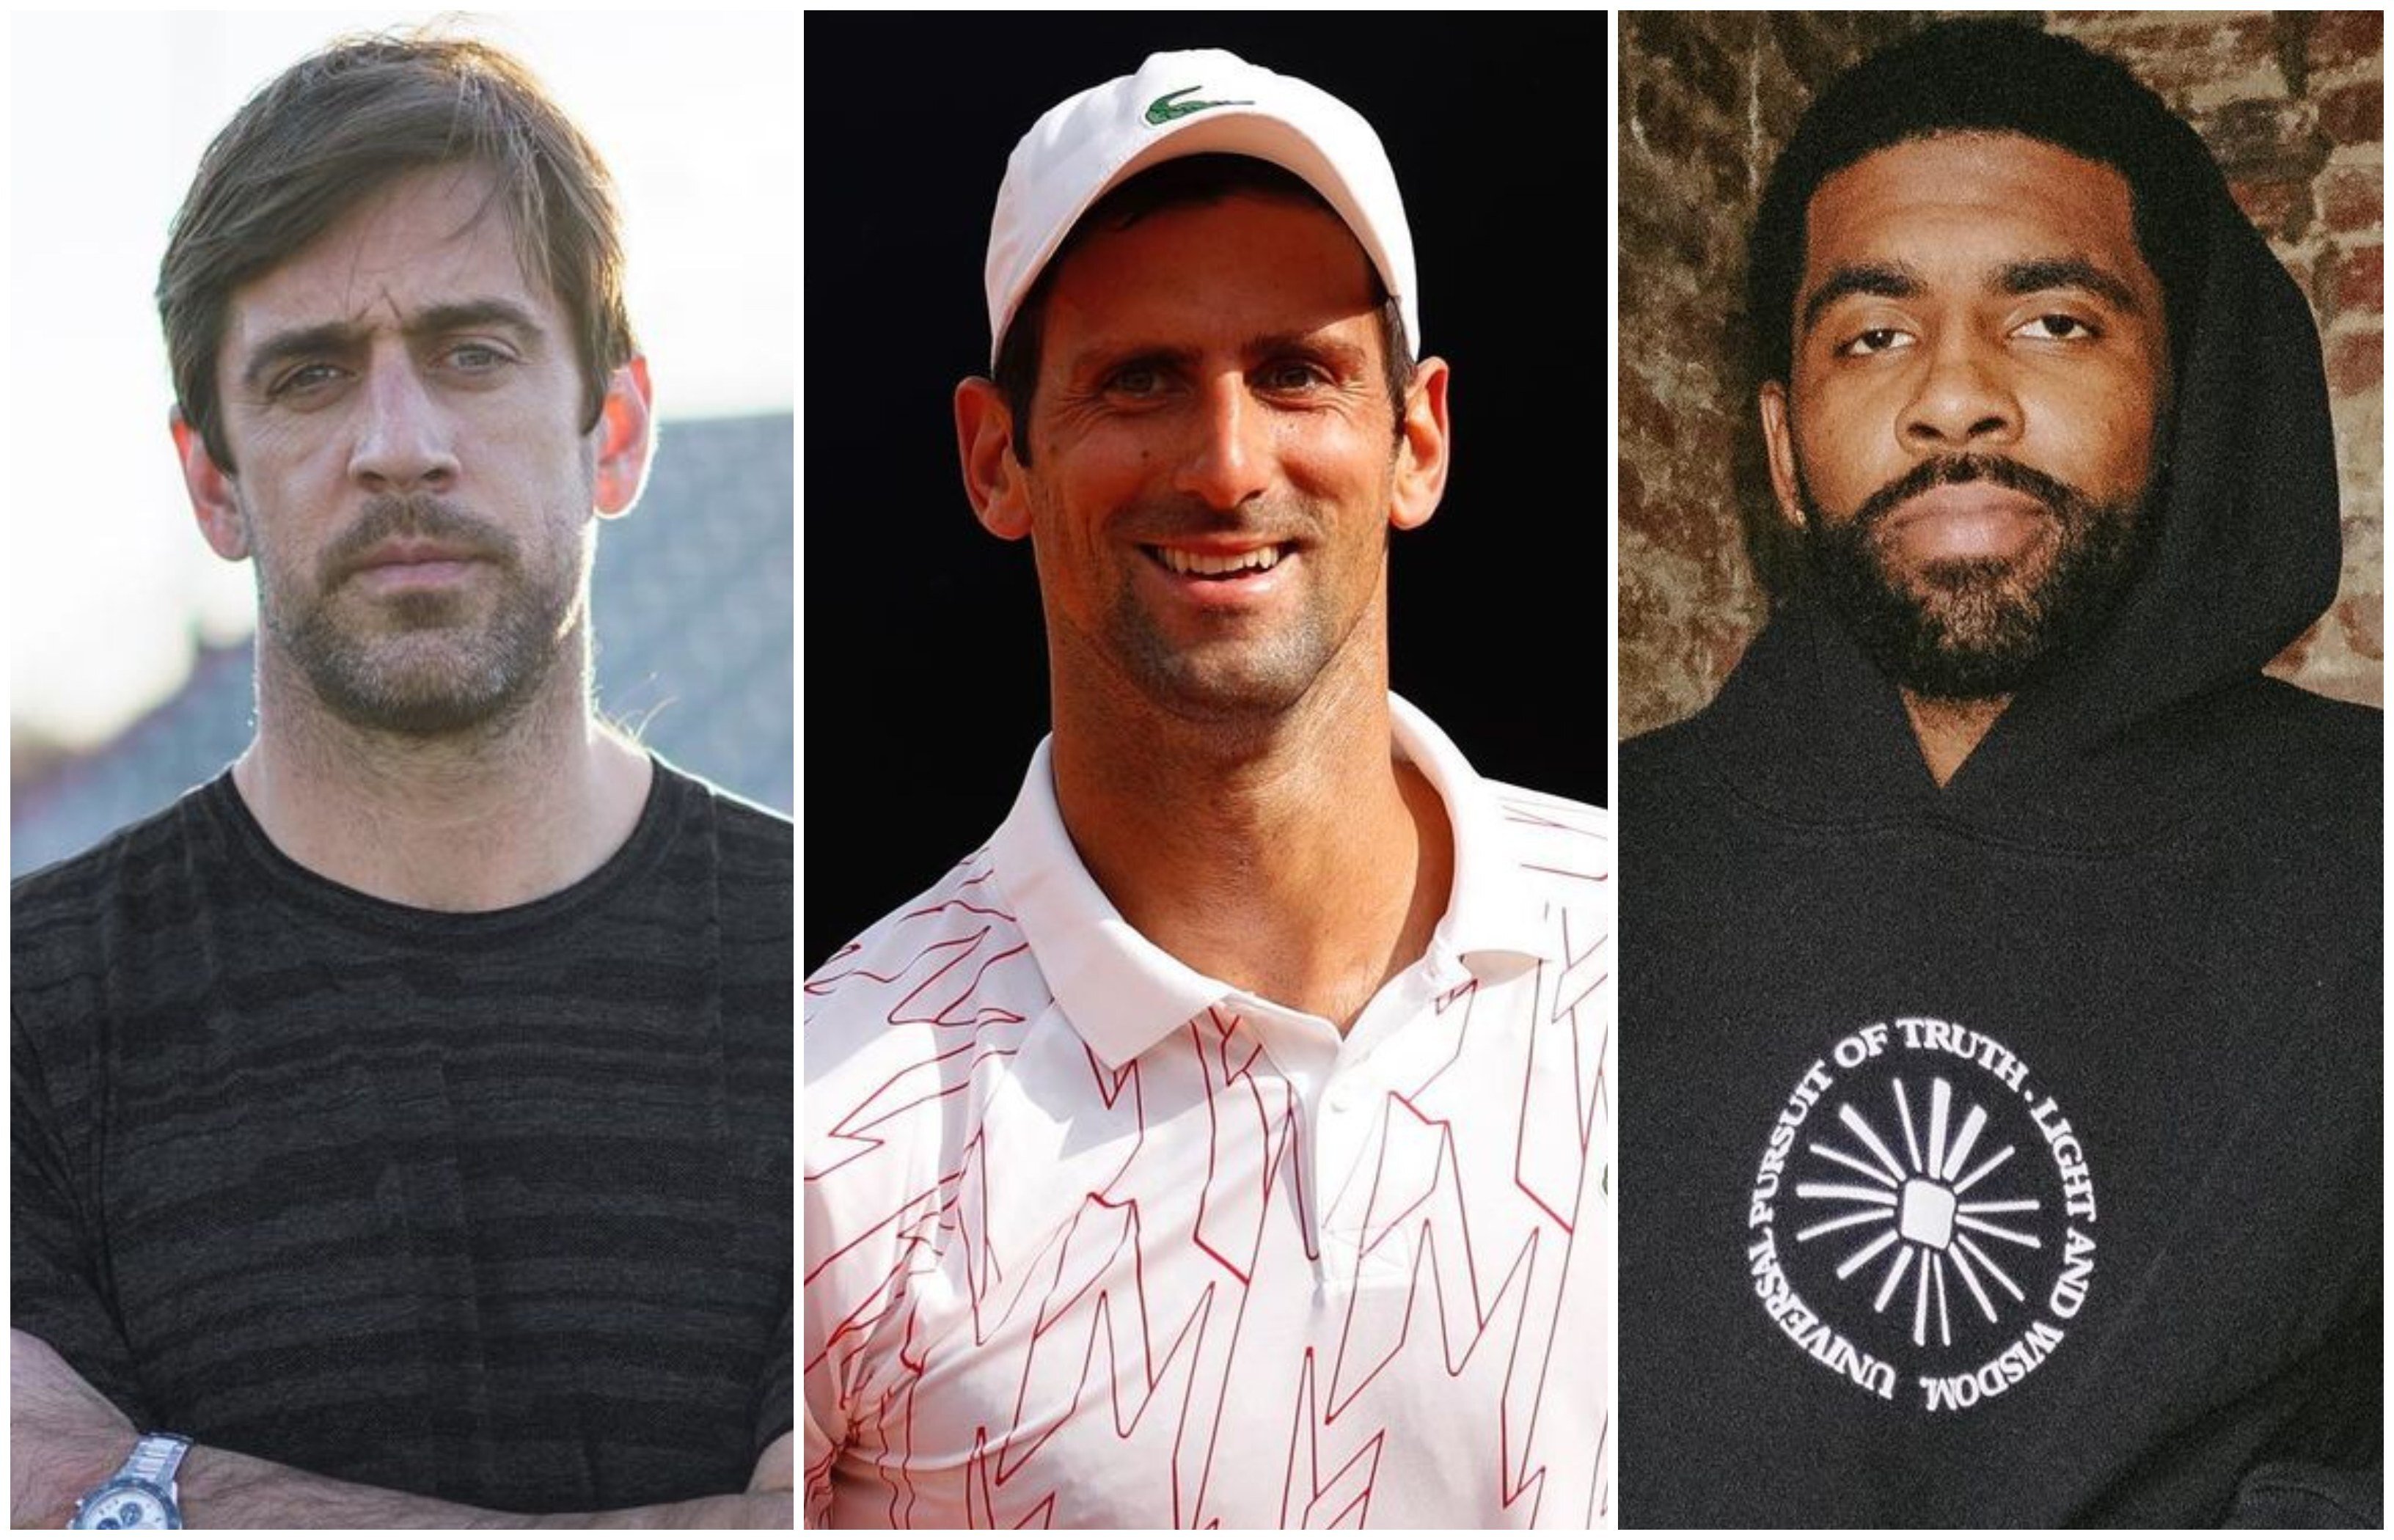 Aaron Rodgers, Novak Djokovic and Kyrie Irving are all famous athletes who opted not to take the Covid-19 vaccine. Photos: @aaronrodgers12, @djokernole, @kyrieirving/Instagram